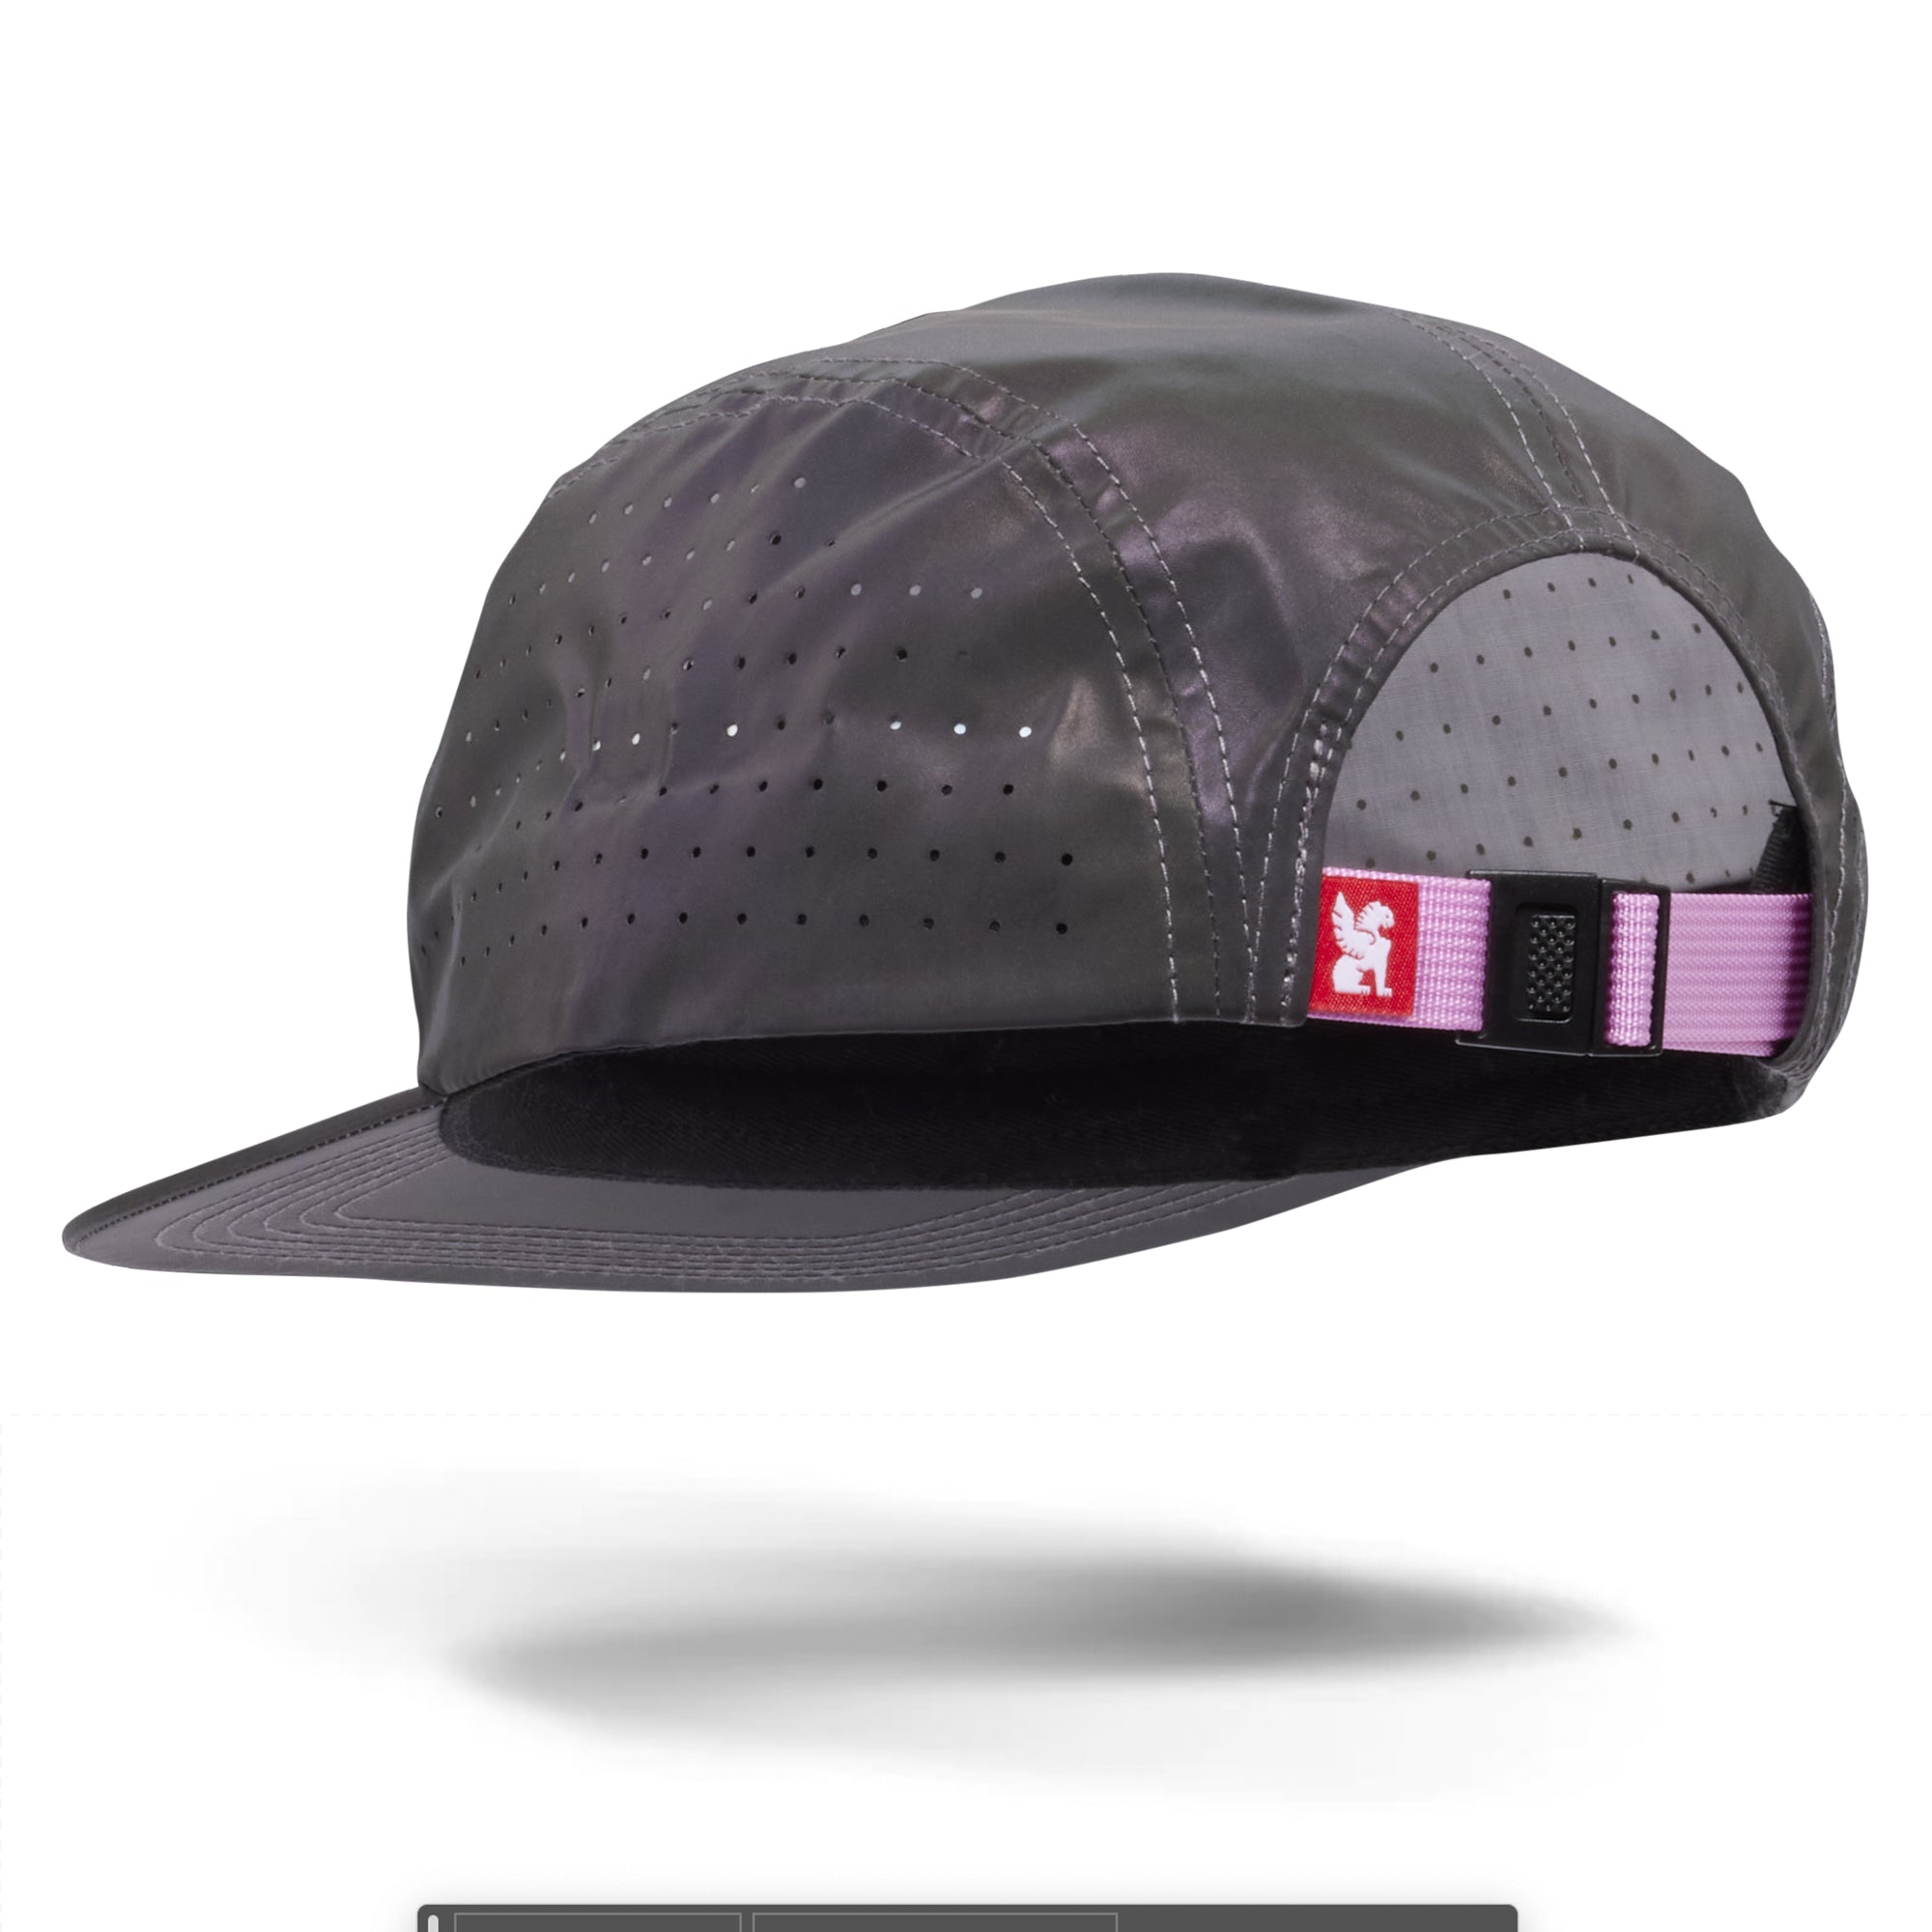 The back strap of the rainbow reflective cap #color_rainbow reflective